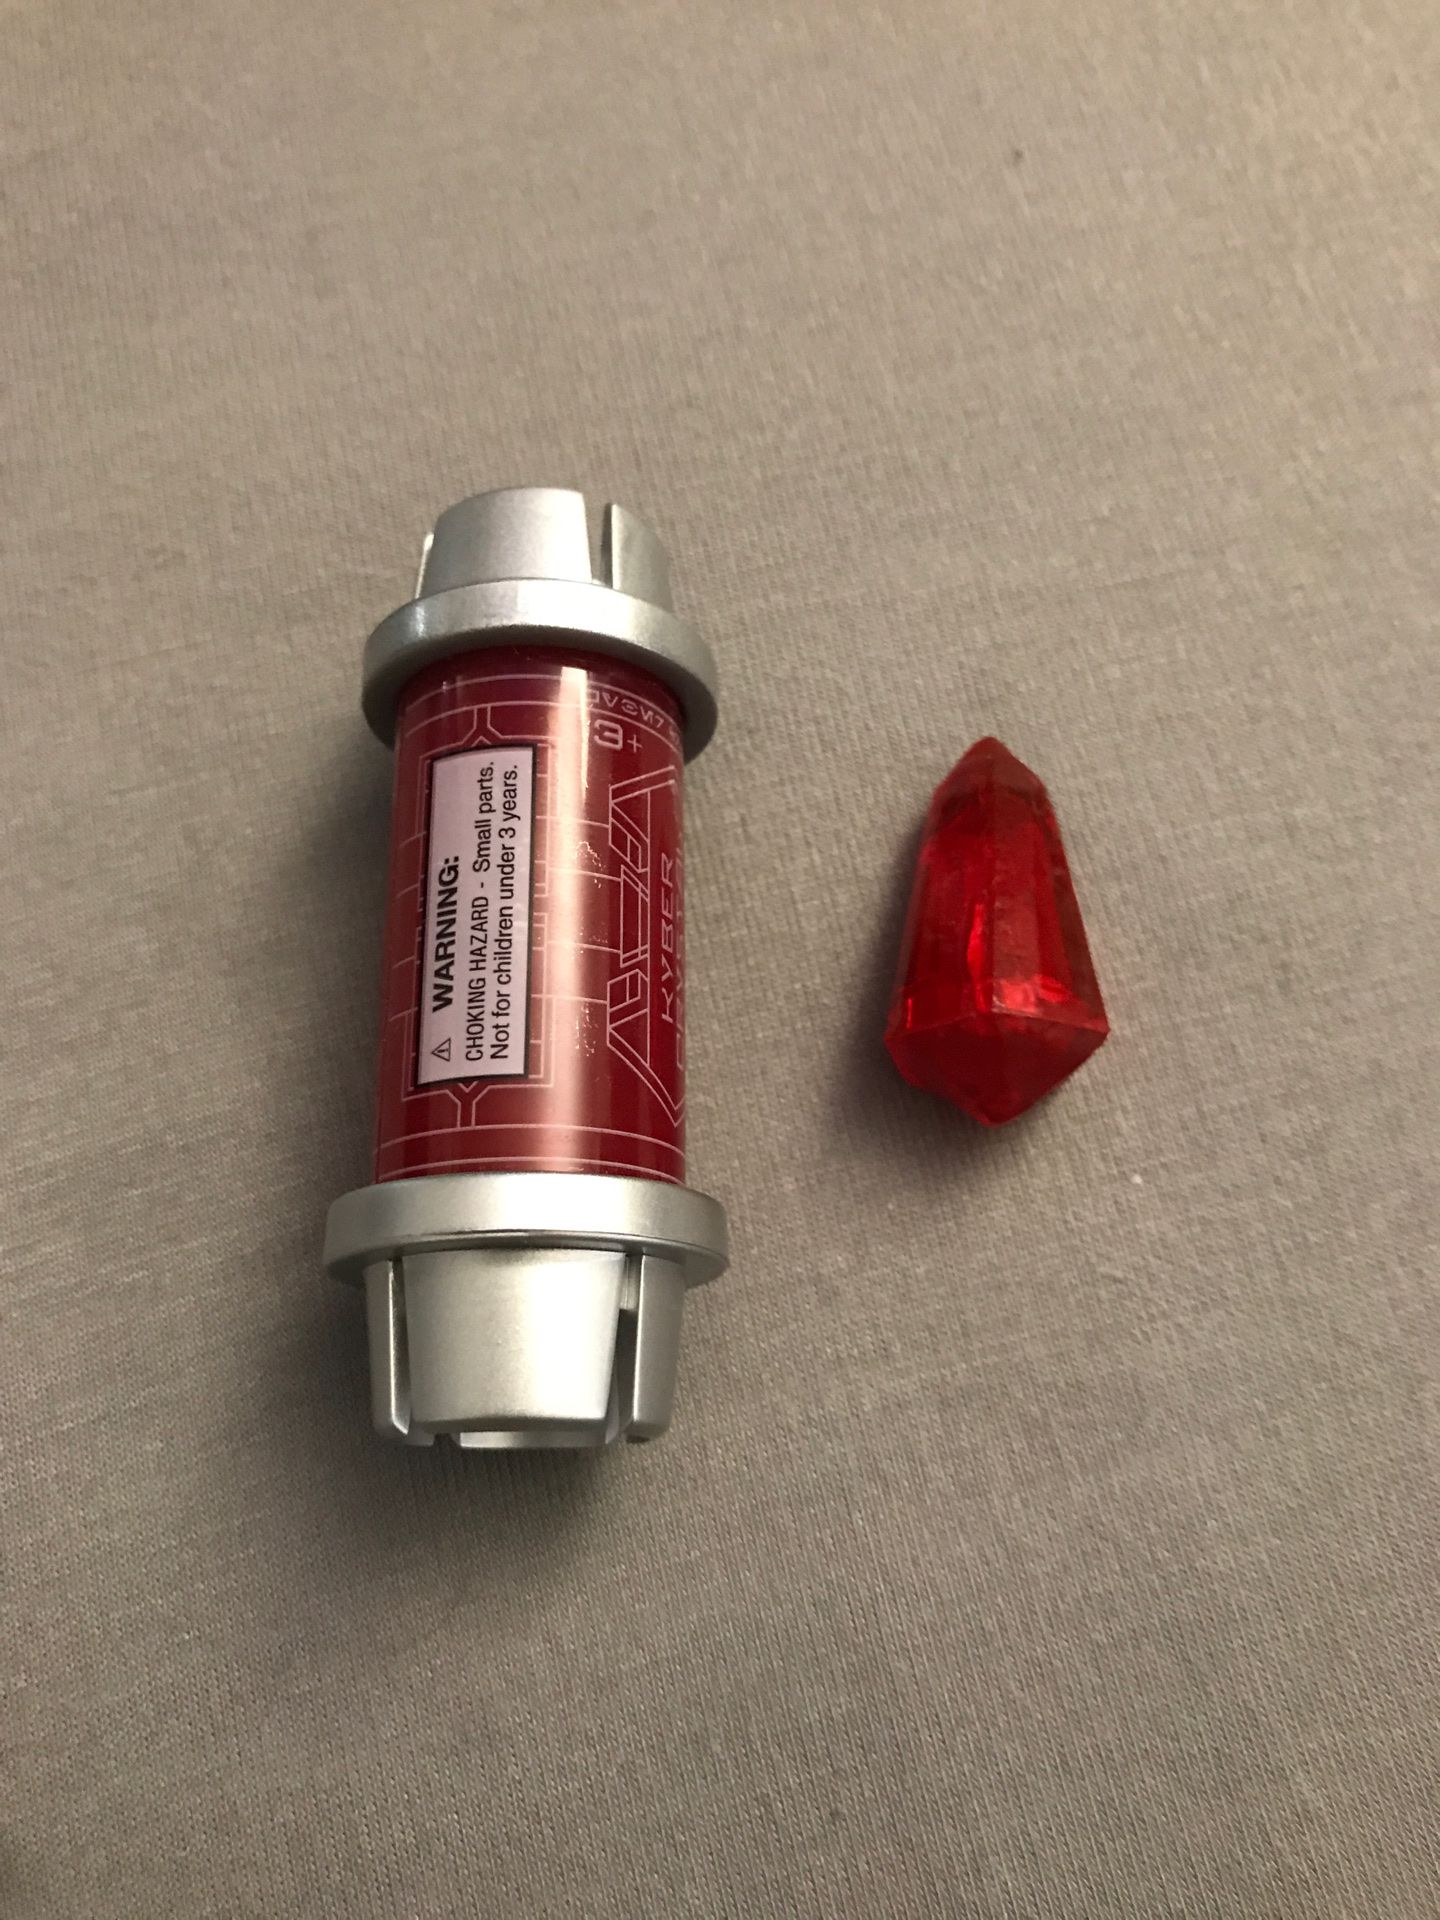 skelet Stejl præst Galaxys Edge RED kyber crystal ANY CODE for Sale in San Diego, CA - OfferUp